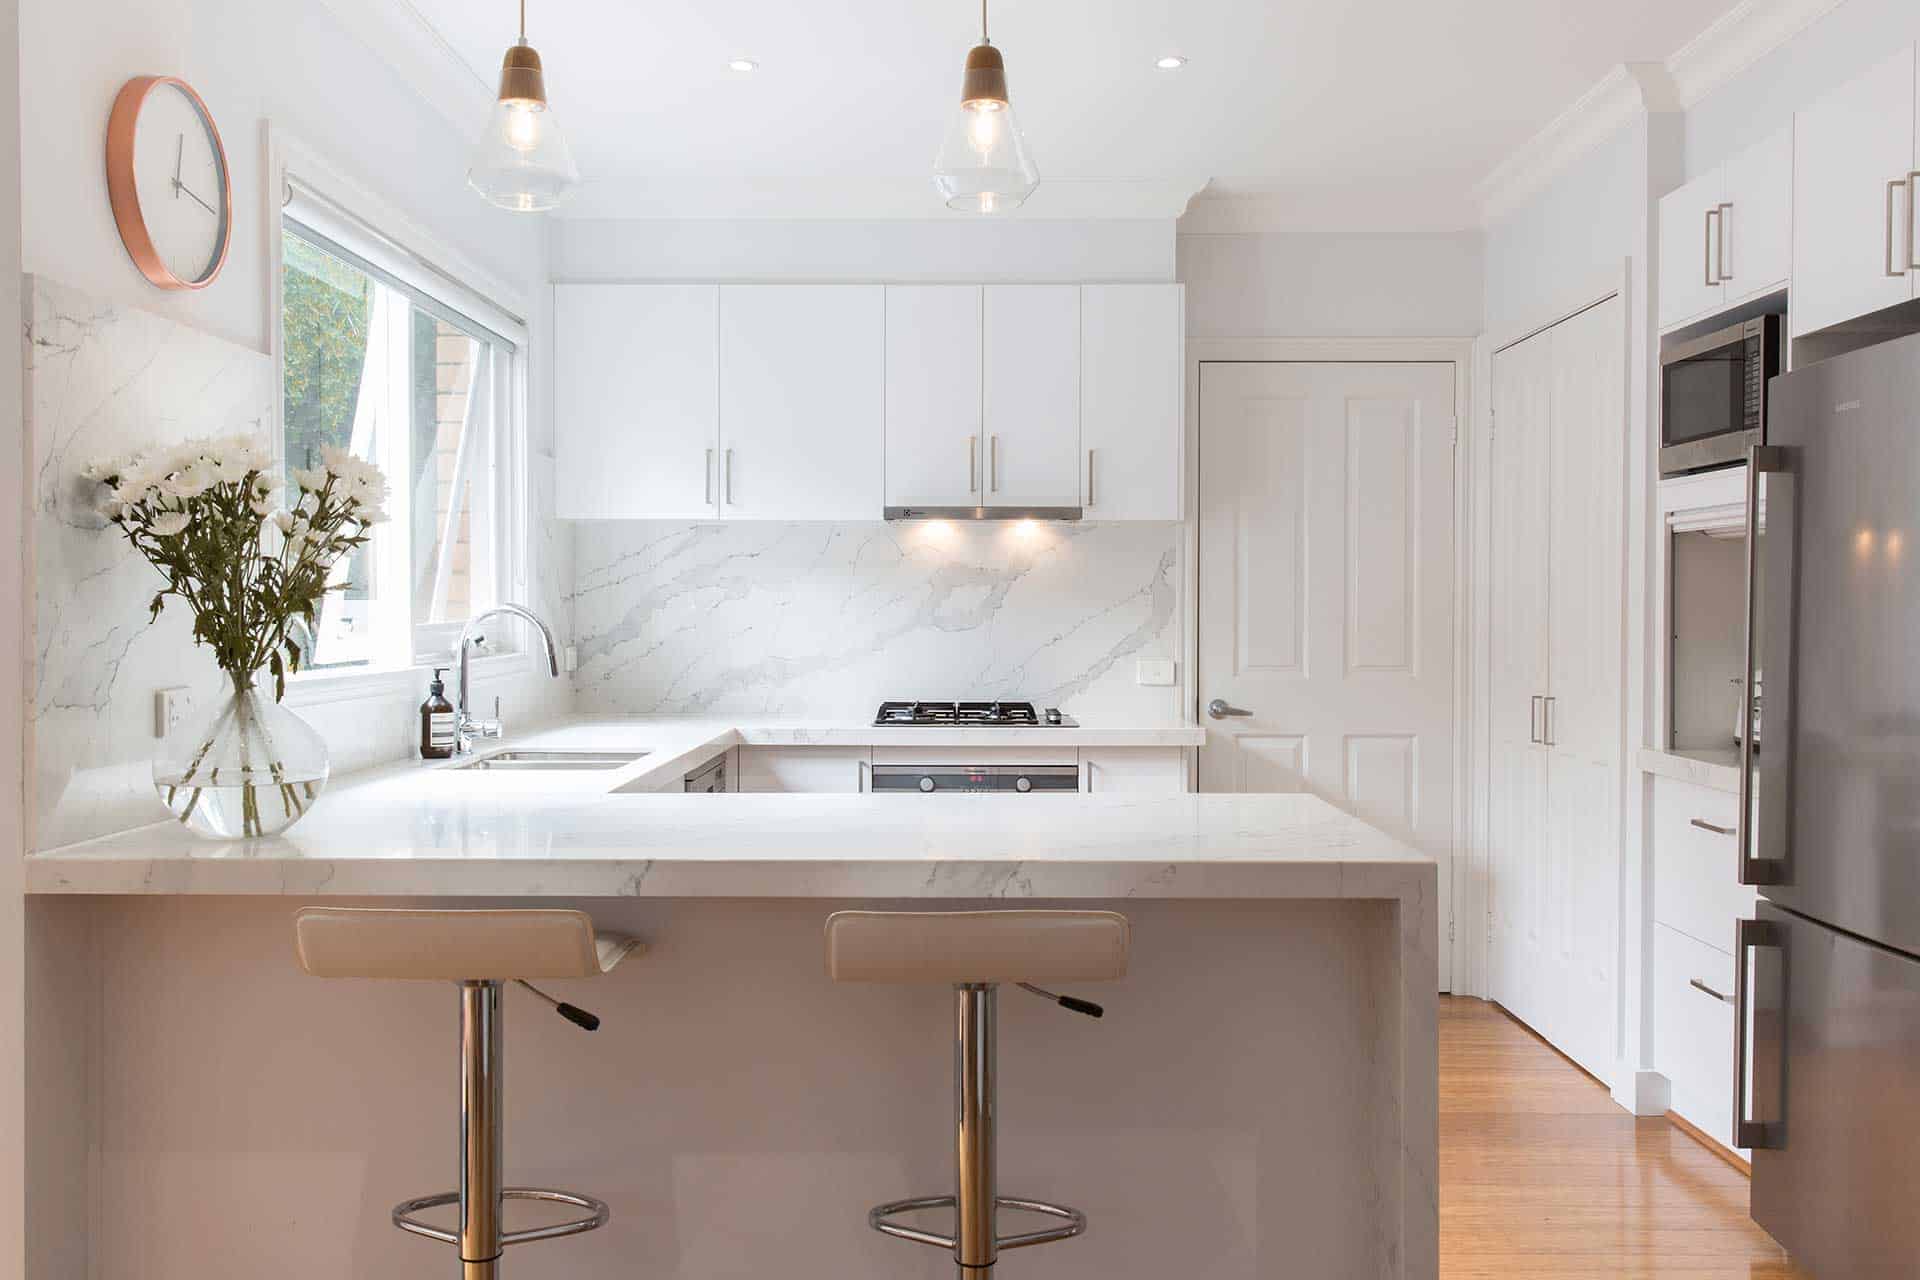 Kitchen Renovations Gallery | United Stone Melbourne